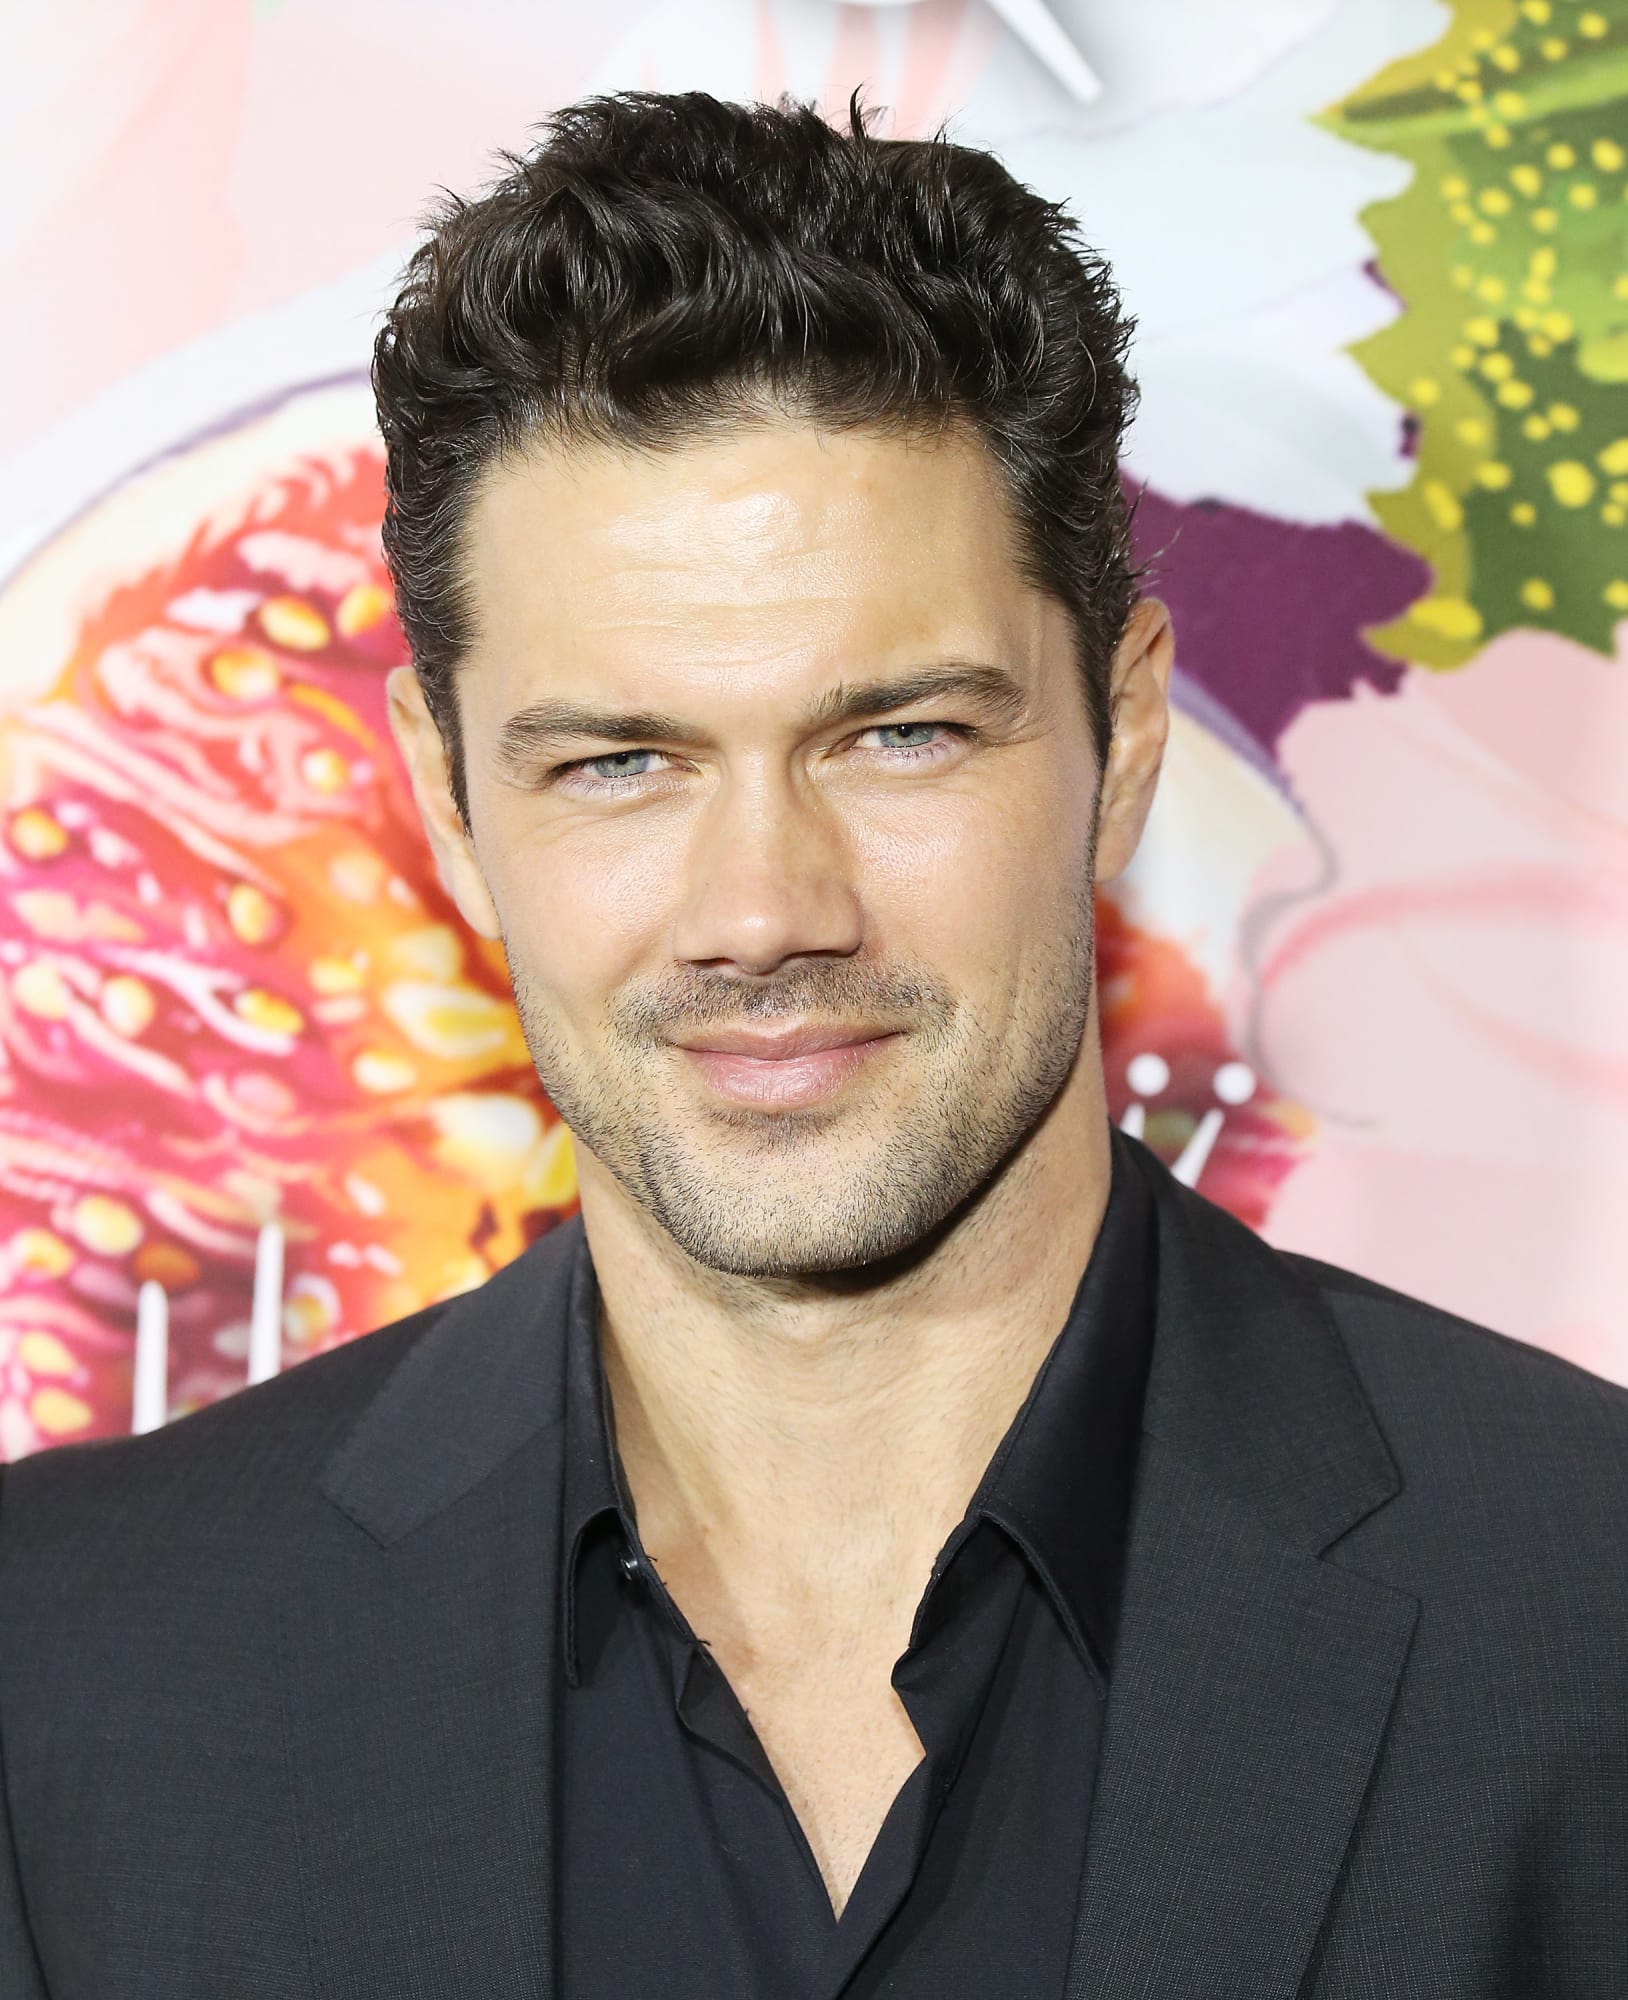 Ryan Paevey is supposedly leaving General Hospital